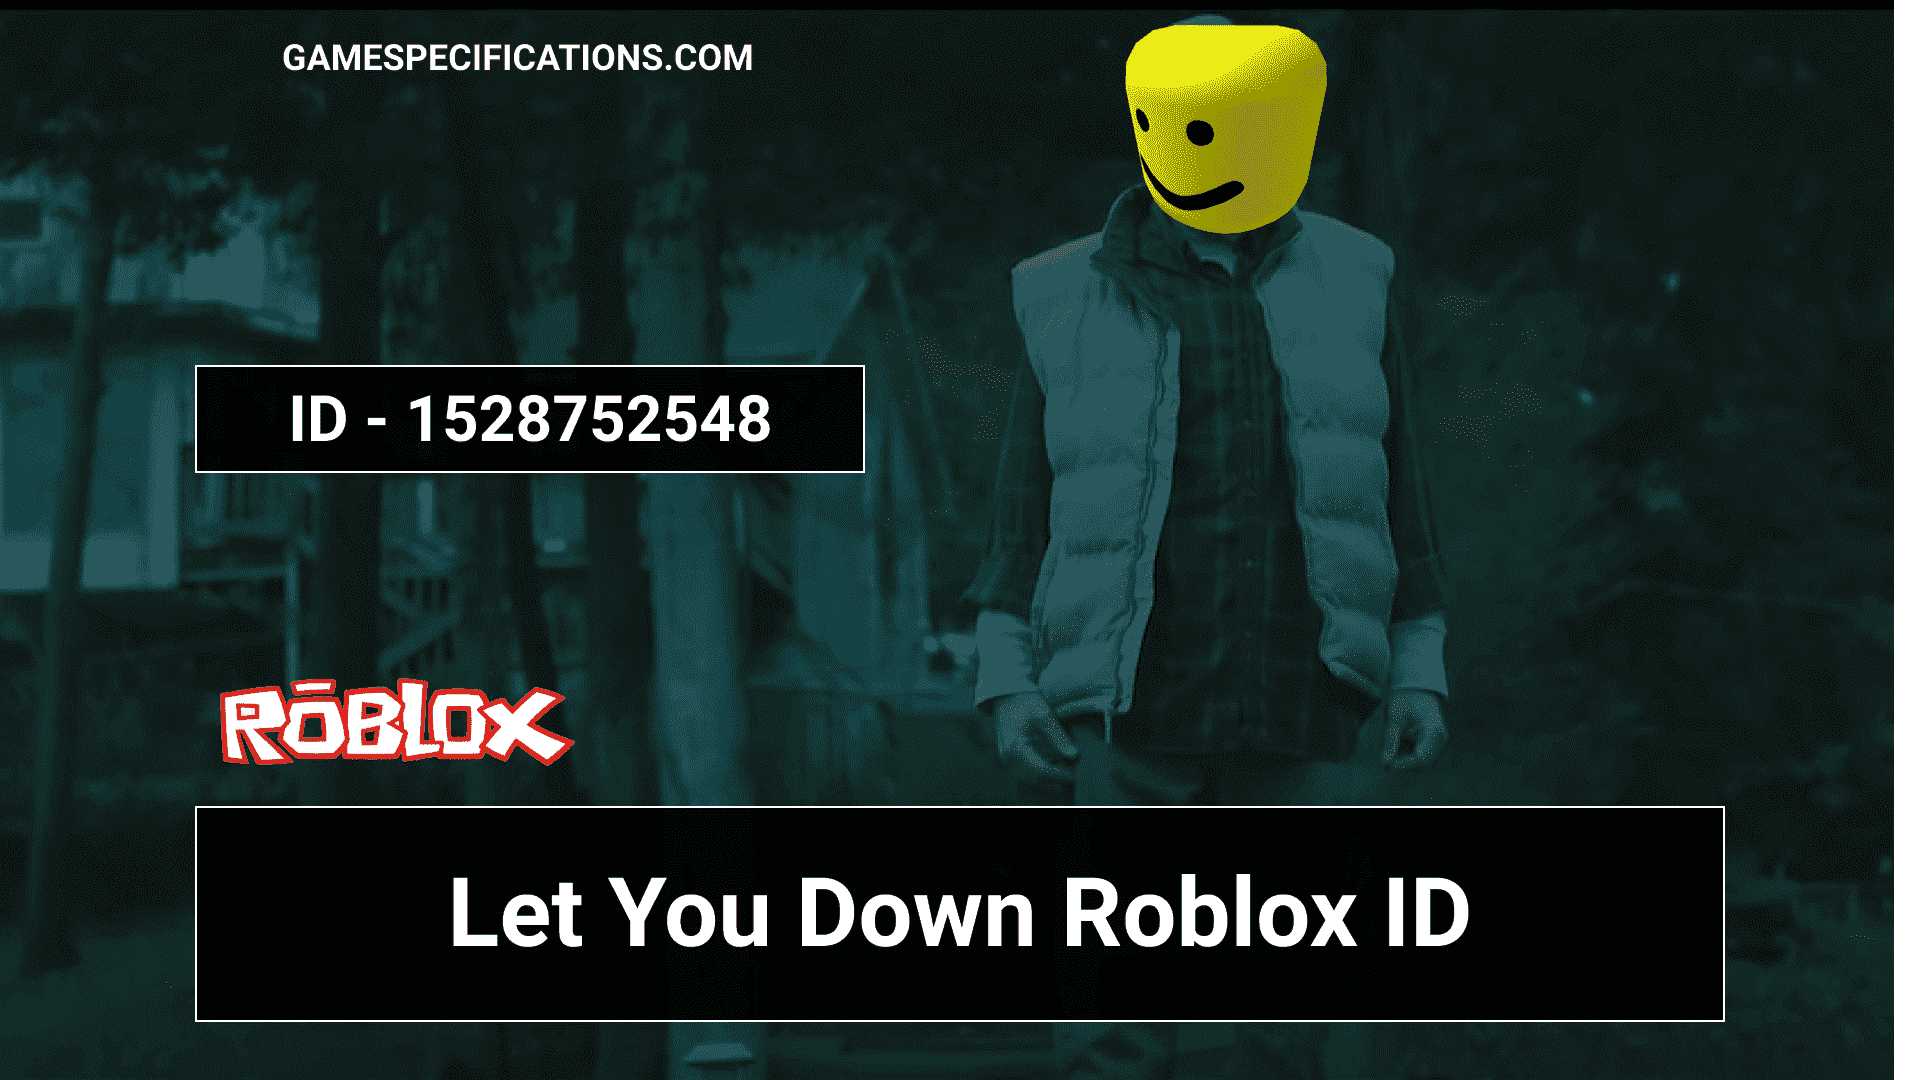 Let You Down Roblox Id Codes To Play The Nf Music 2021 Game Specifications - everything is awesome roblox song code